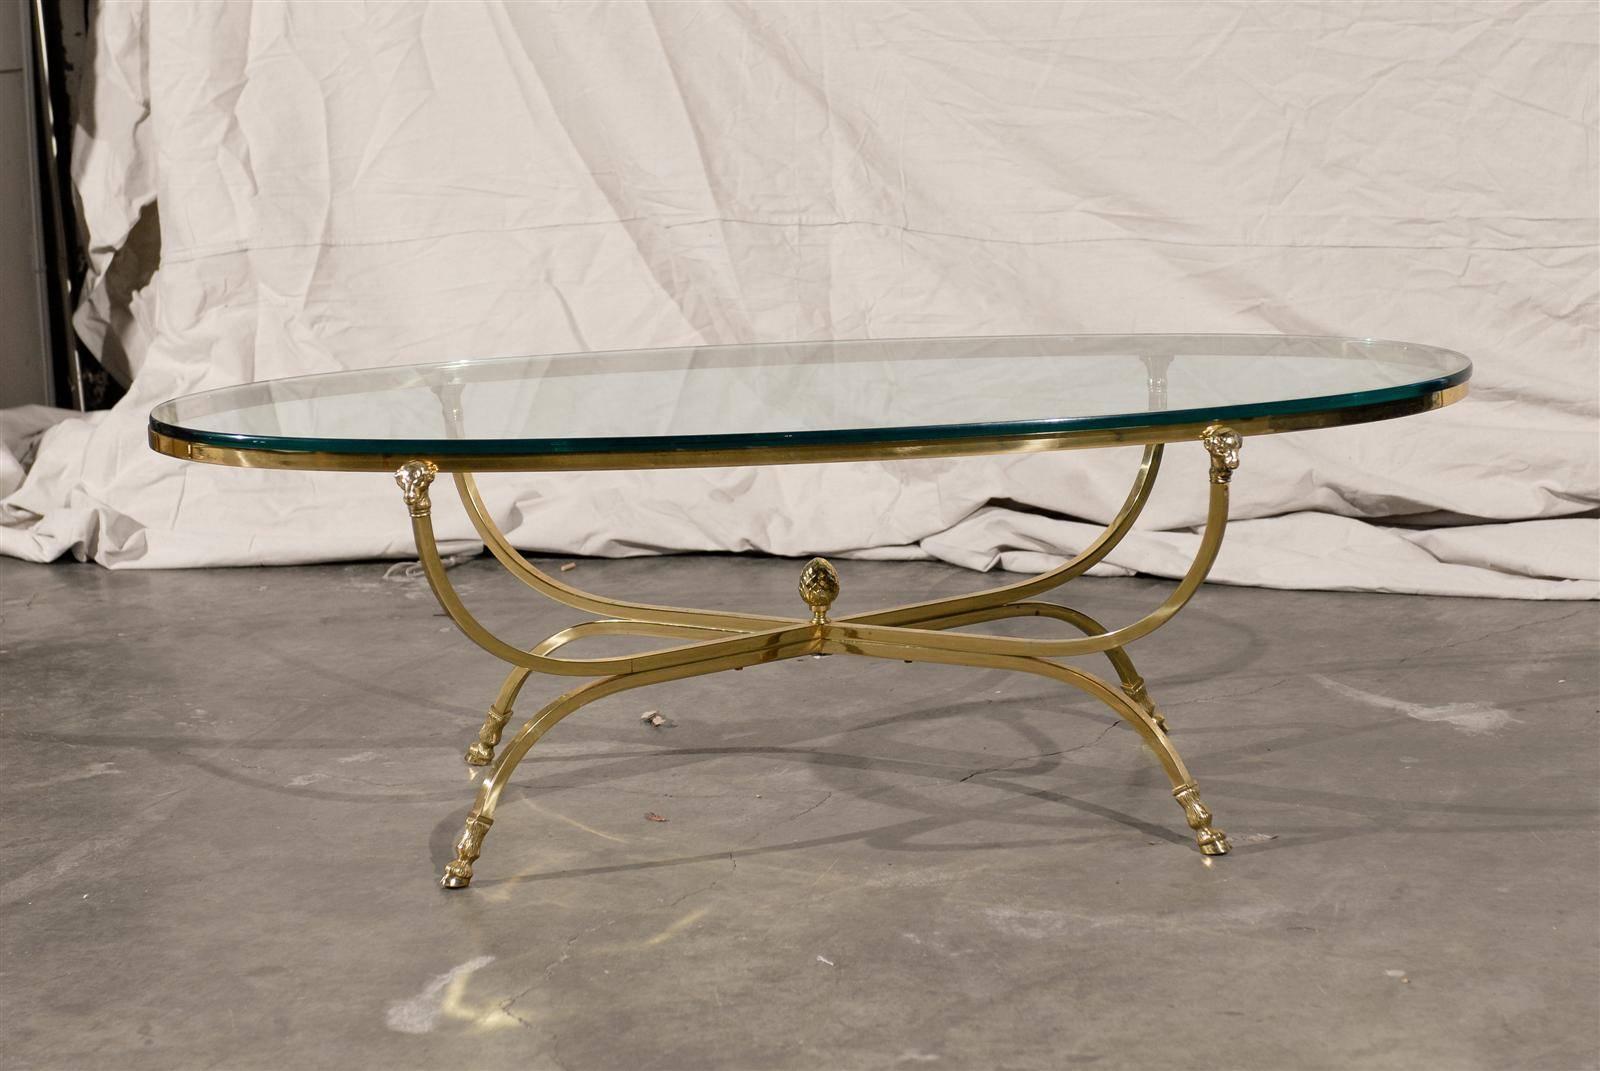 20th Century Mid-Century Oval Brass Coffee Table with Glass Top Attributed to Maison Jansen